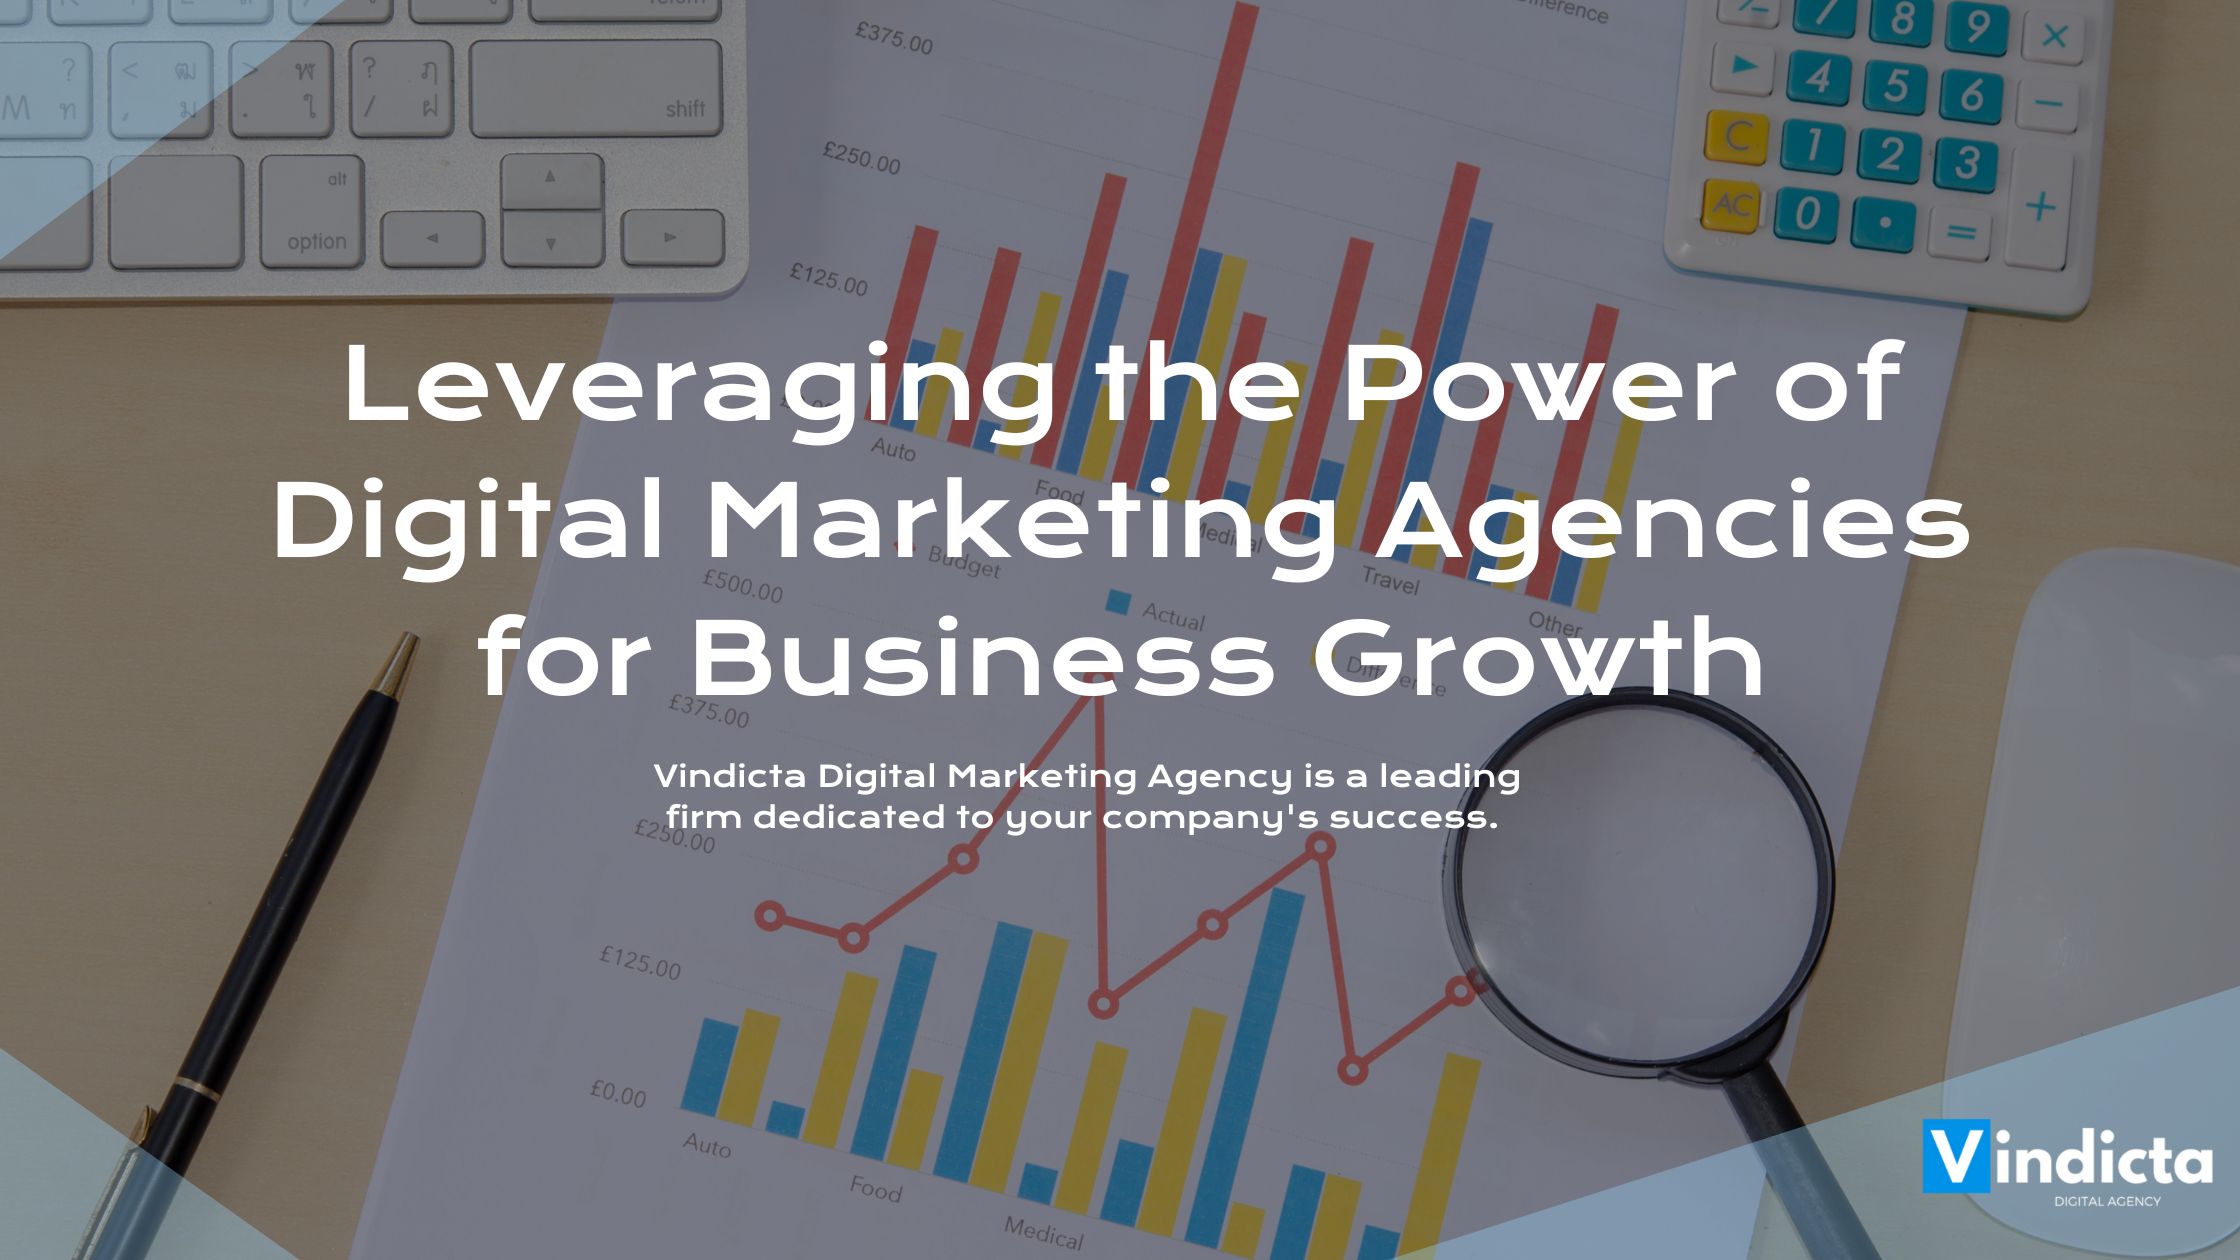 Leveraging the Power of Digital Marketing Agencies for Business Growth